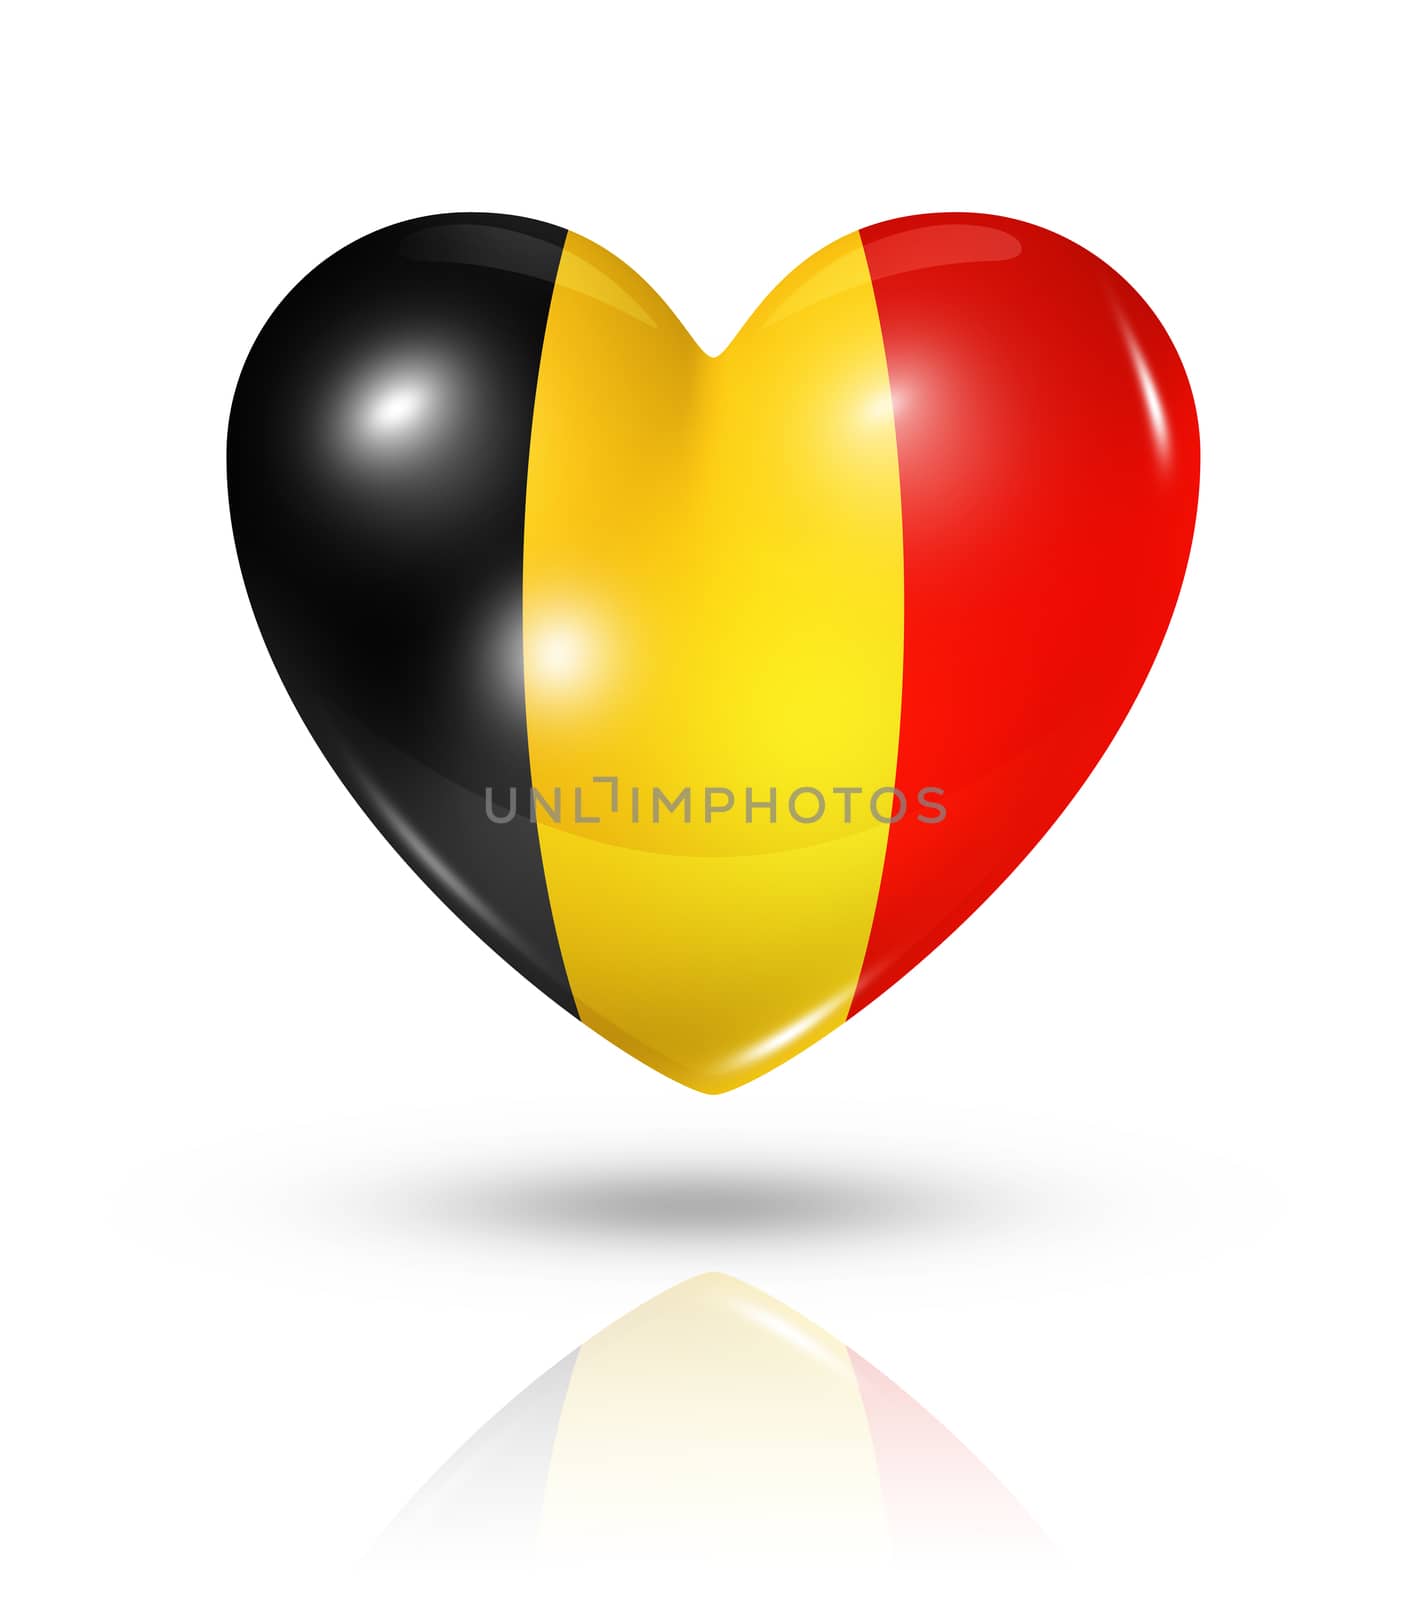 Love Belgium, heart flag icon by daboost